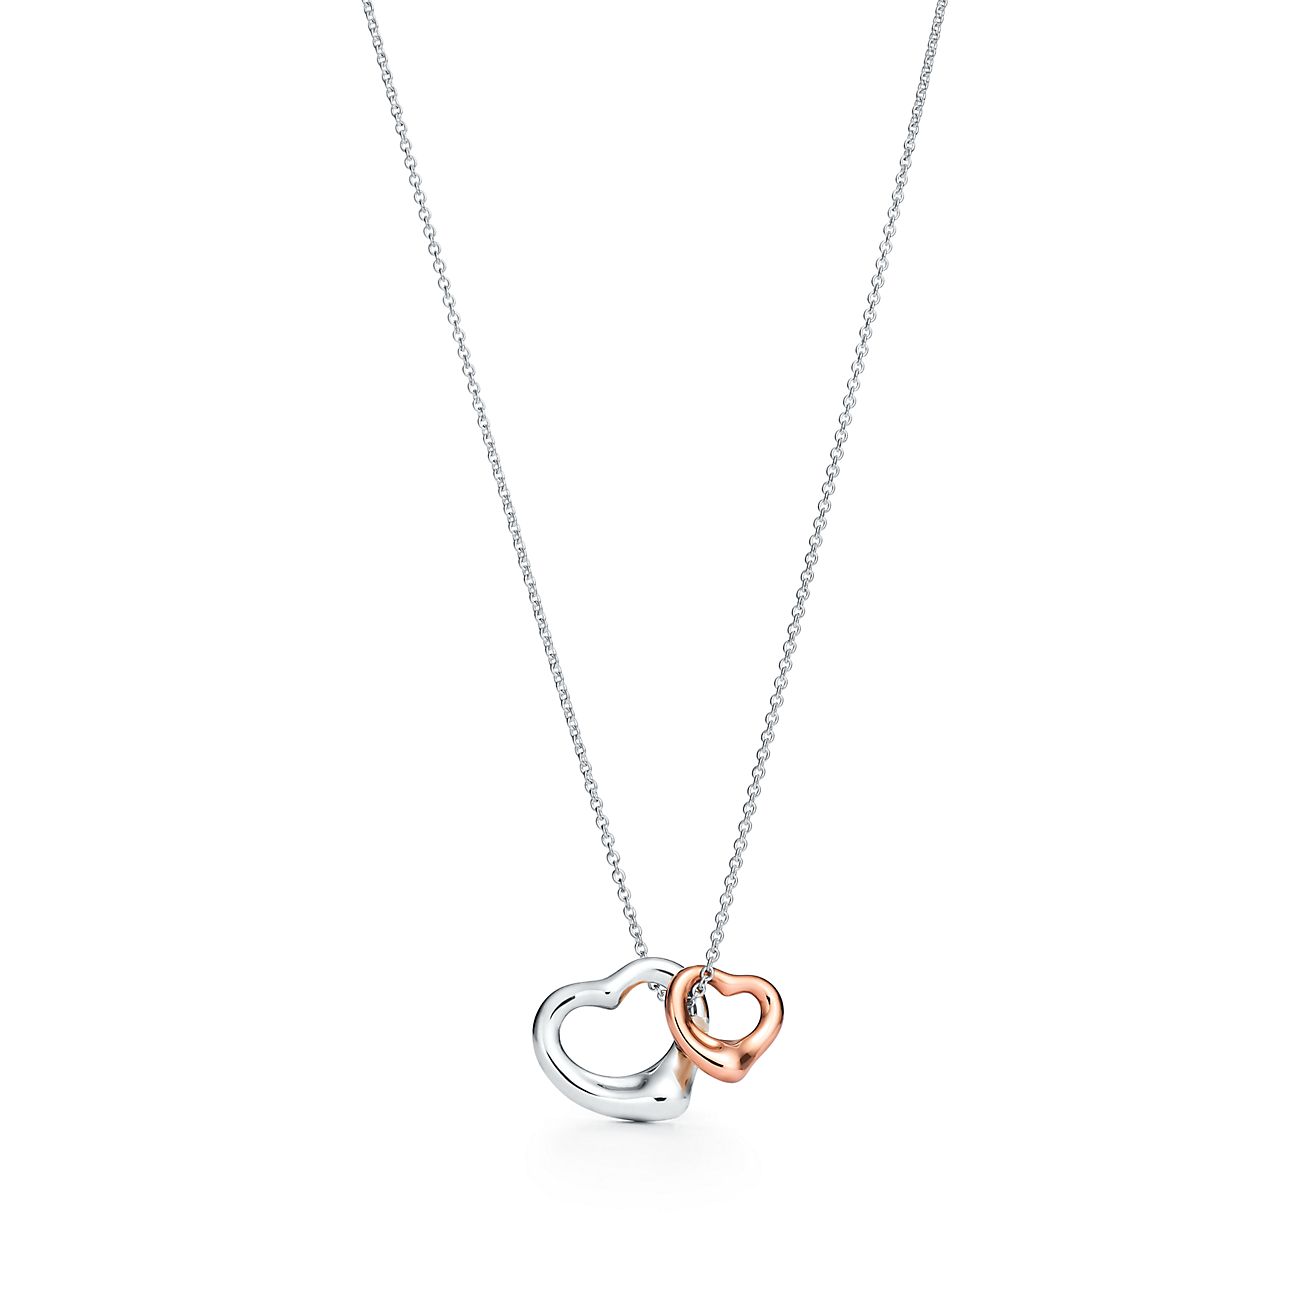 tiffany open heart necklace rose gold